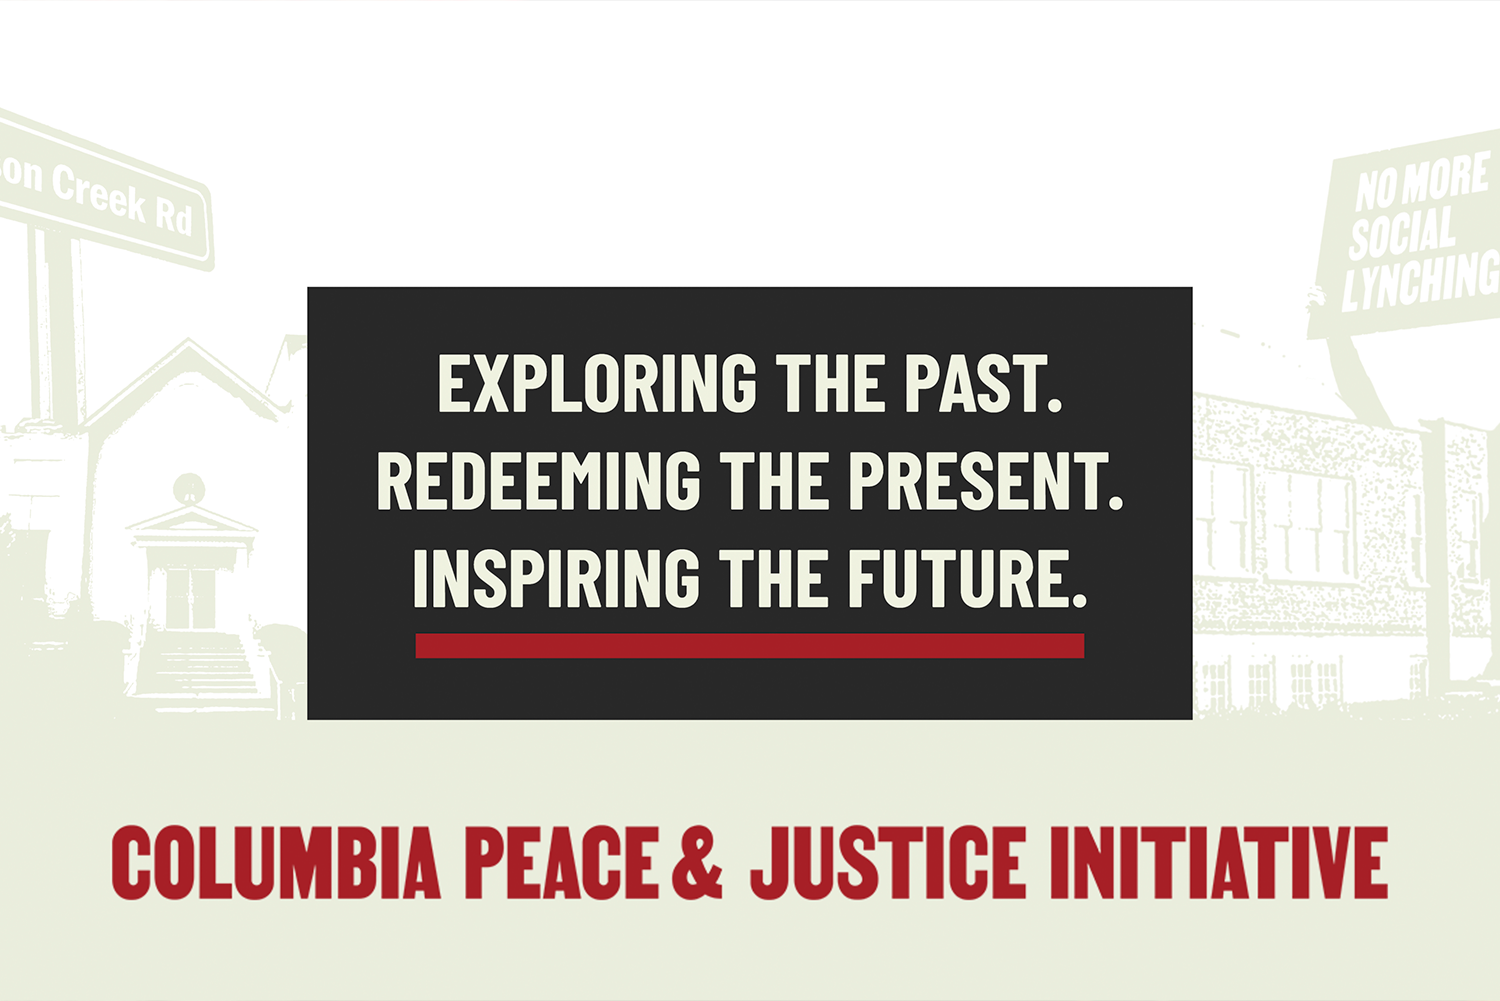   COLUMBIA PEACE &amp; JUSTICE INITIATIVE   Telling the story of history and healing &gt;&gt;  